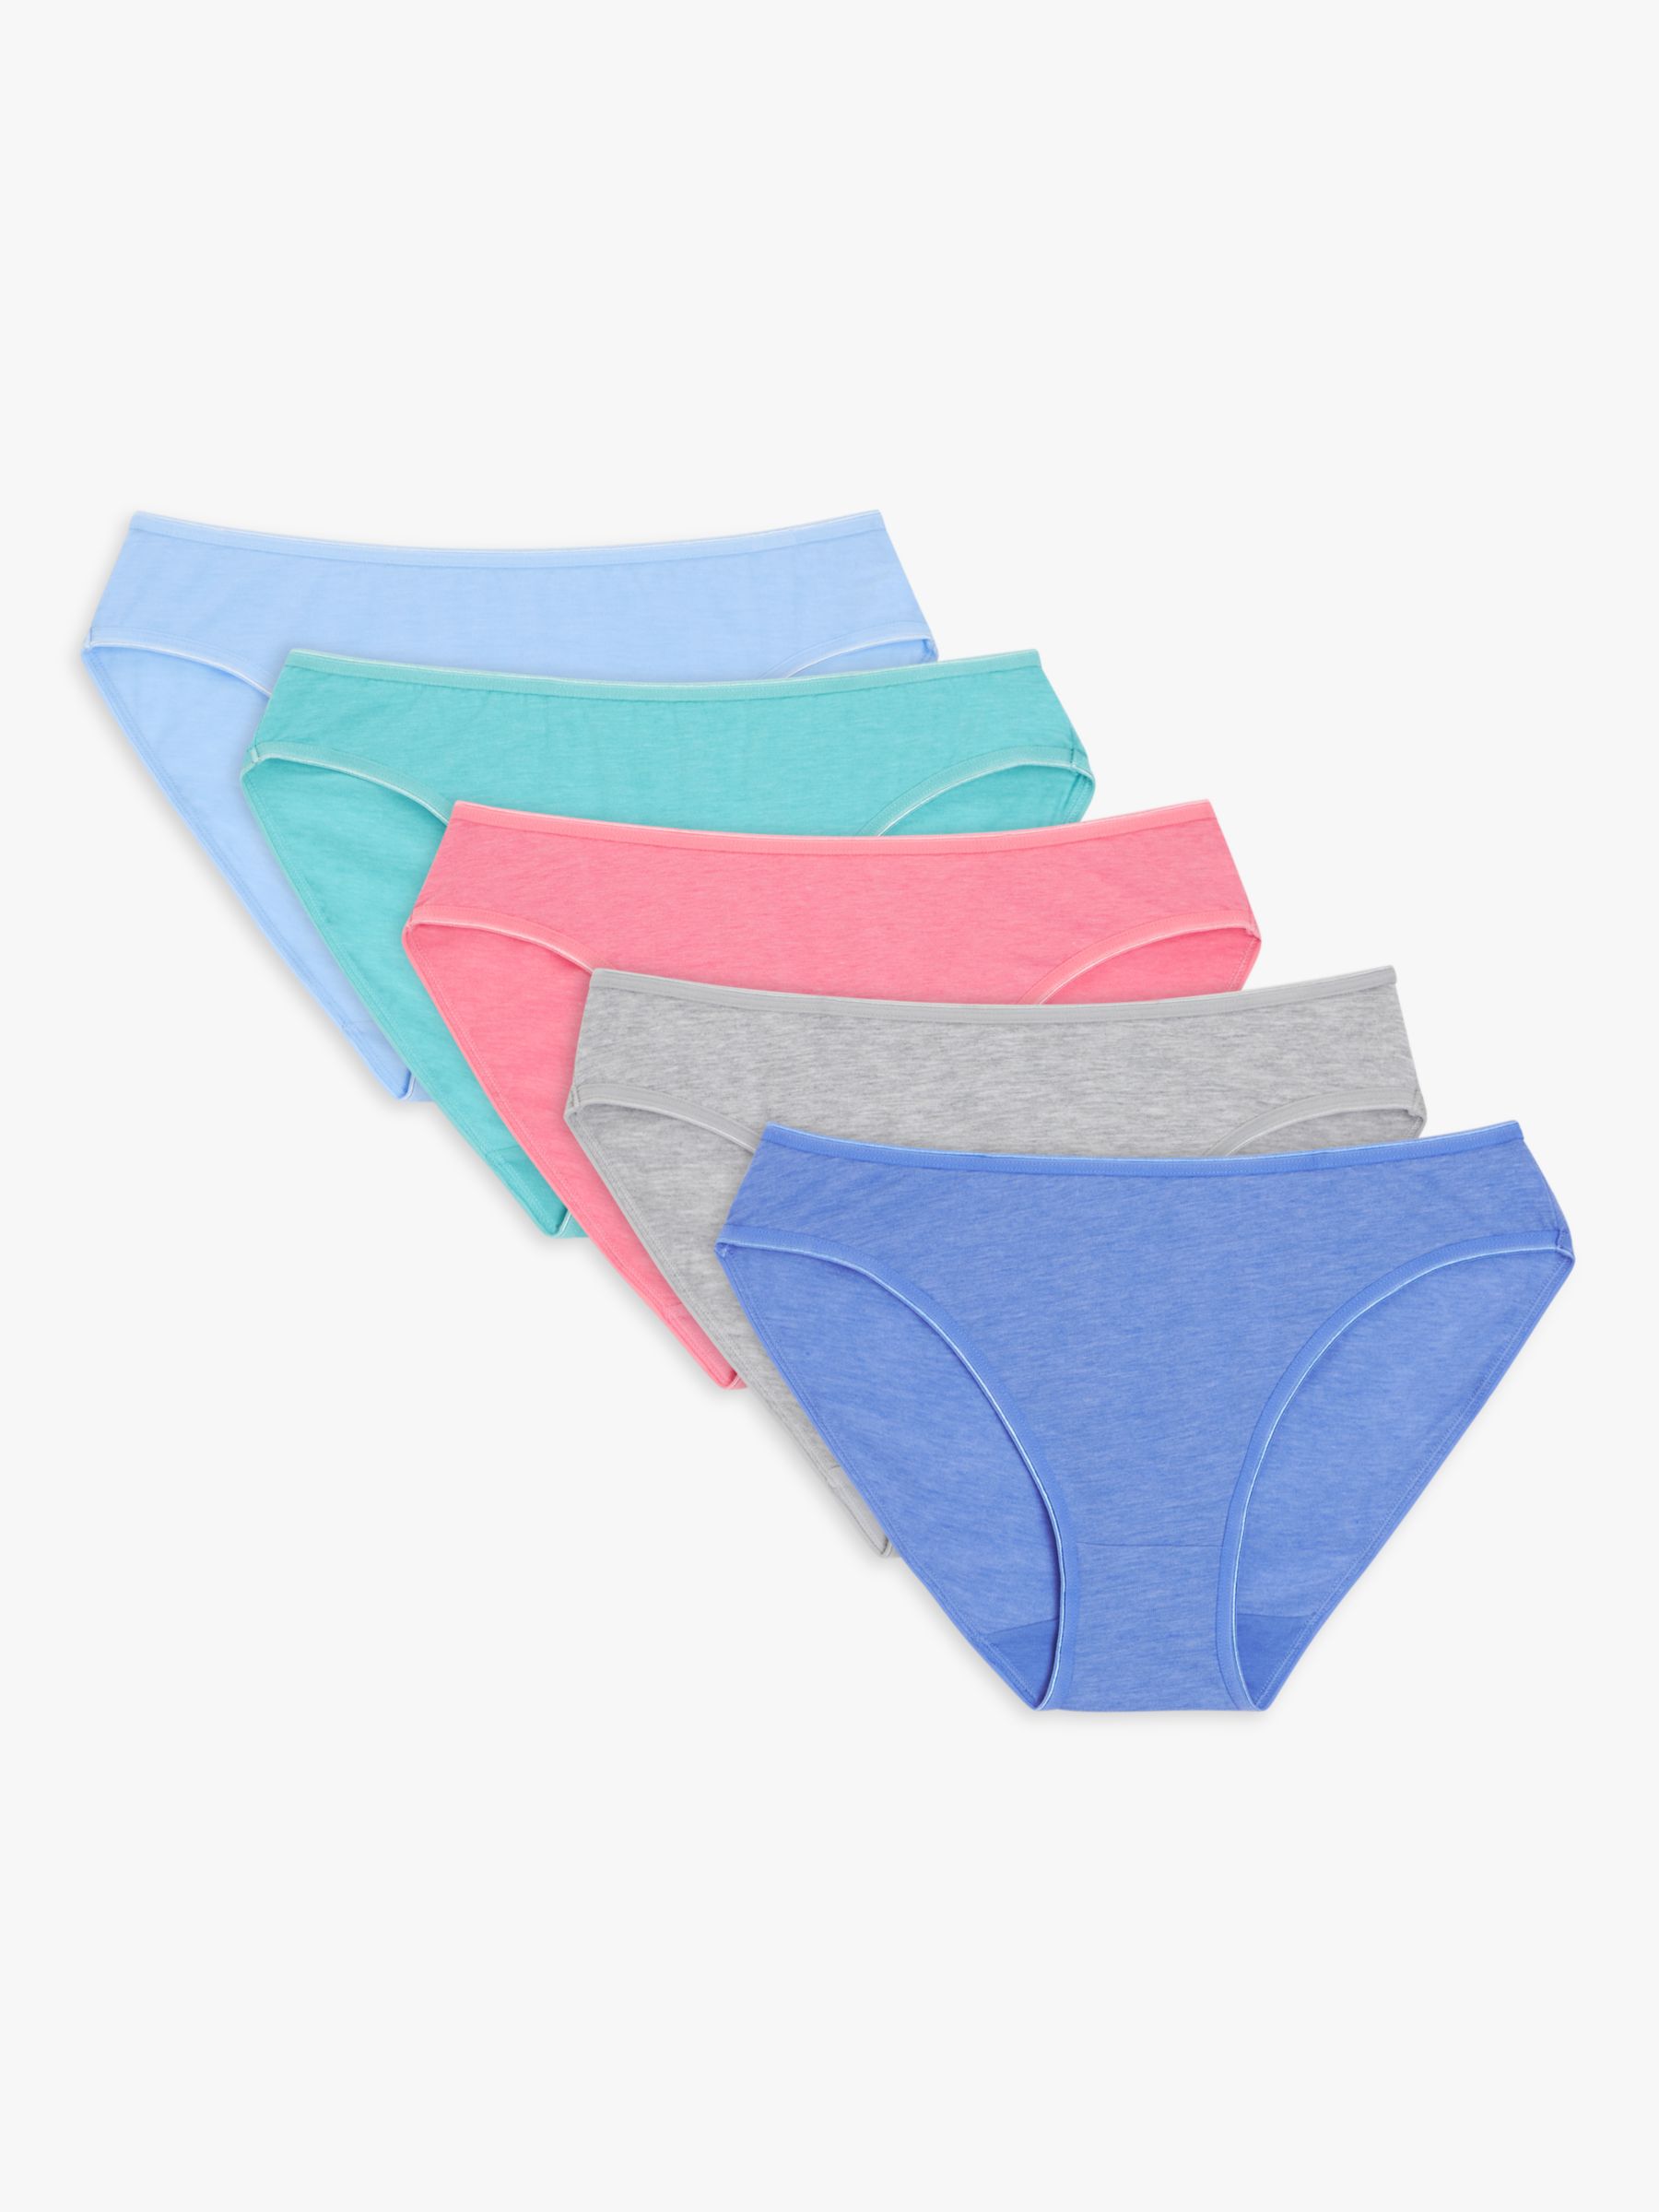 John Lewis ANYDAY Microfibre Lace Bikini Knickers, Pack of 3, £16.00